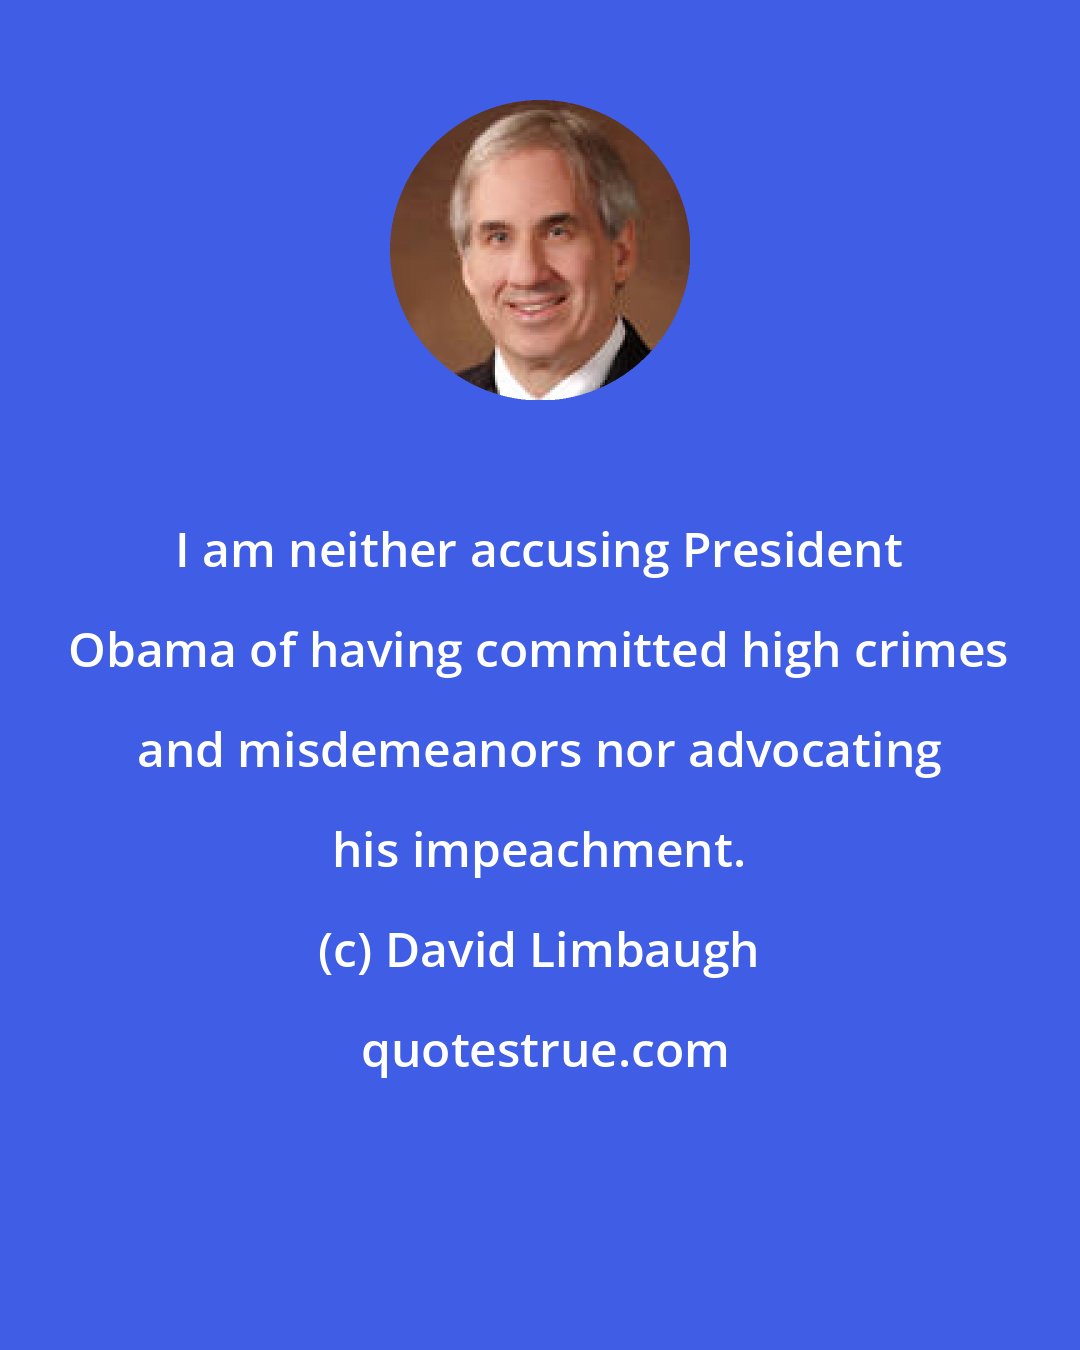 David Limbaugh: I am neither accusing President Obama of having committed high crimes and misdemeanors nor advocating his impeachment.